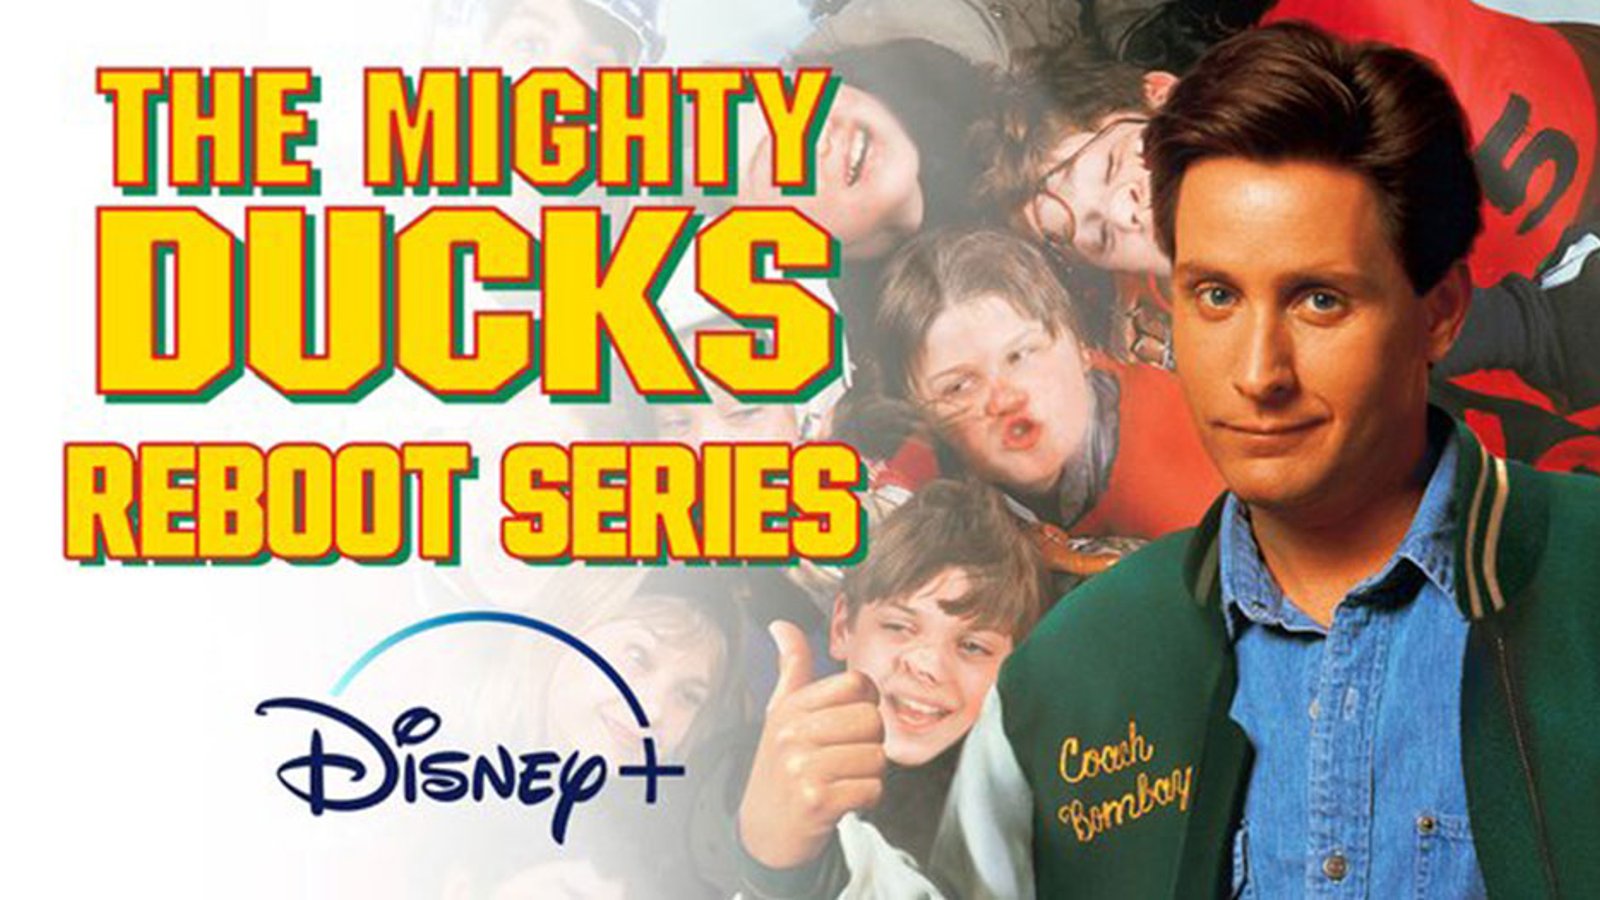 The Mighty Ducks are back, baby!